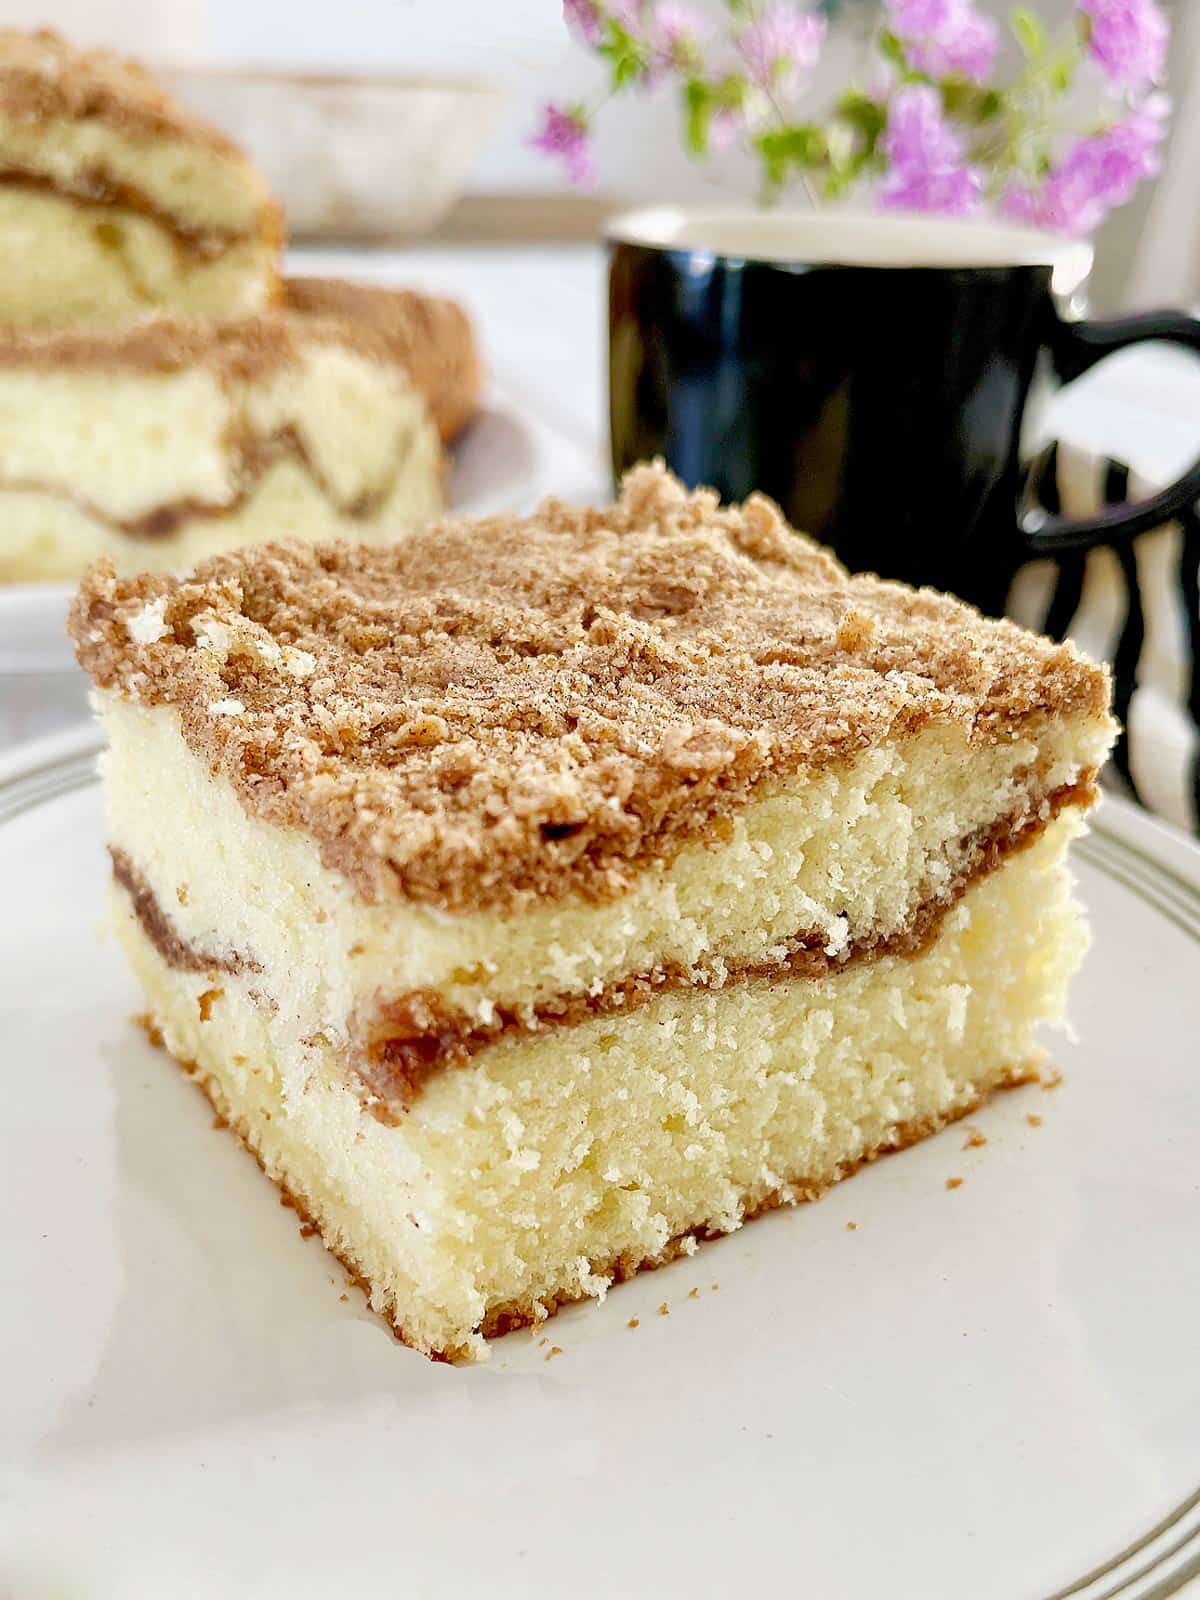 Square slice of coffee cake with cinnamon streusel on top and in the middle.